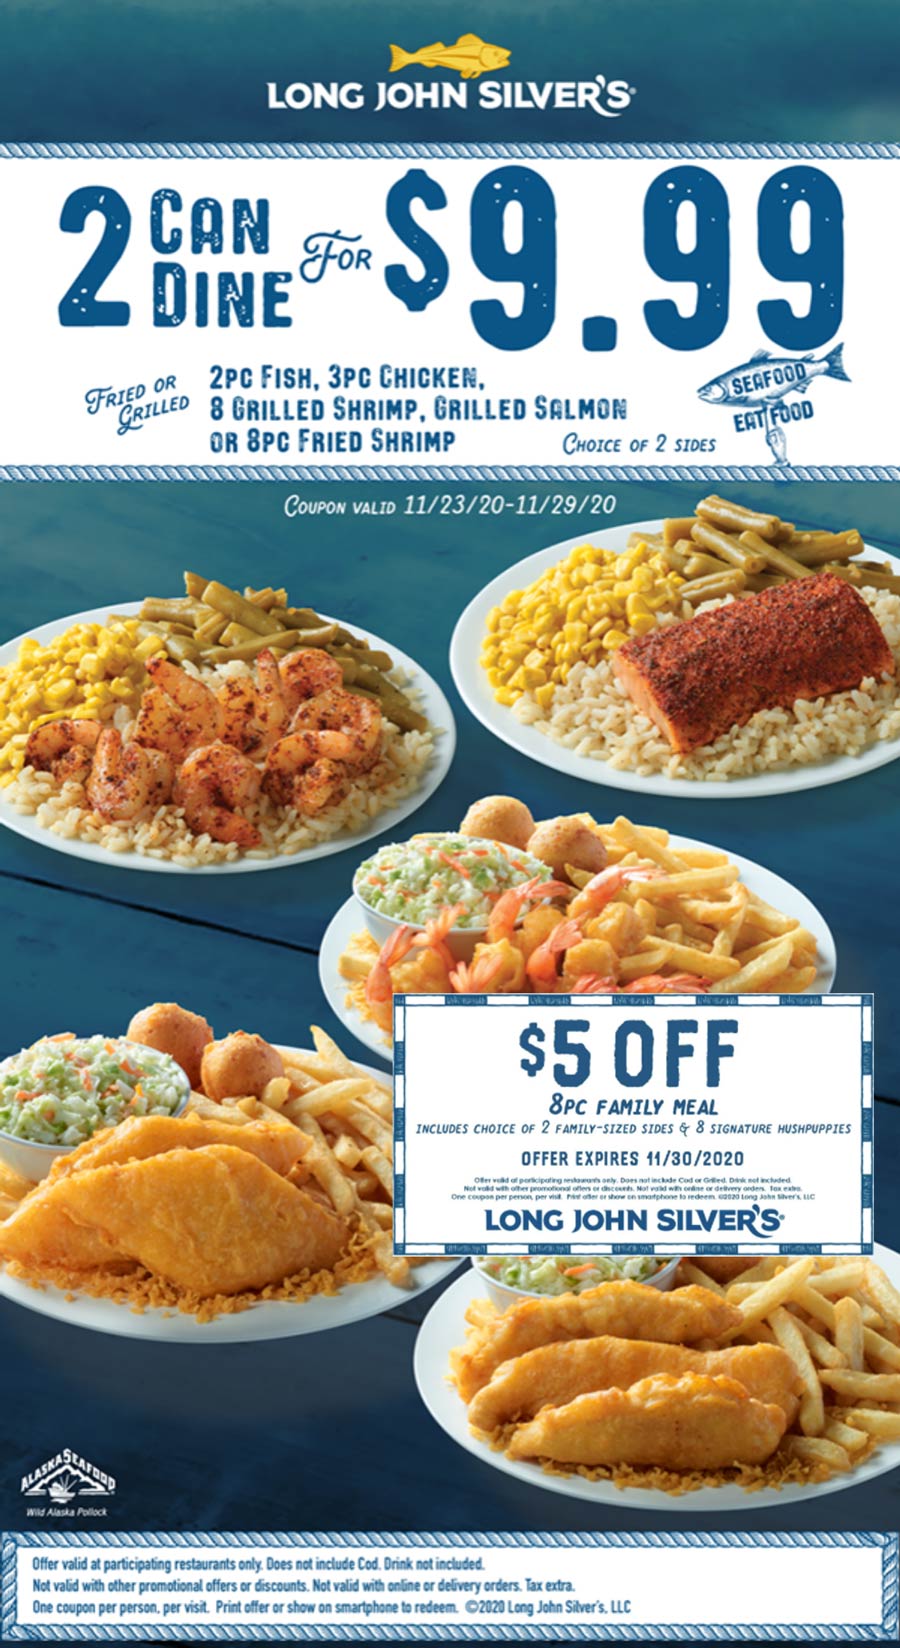 $5 off 8pc family meal & more at Long John Silvers #longjohnsilvers ...